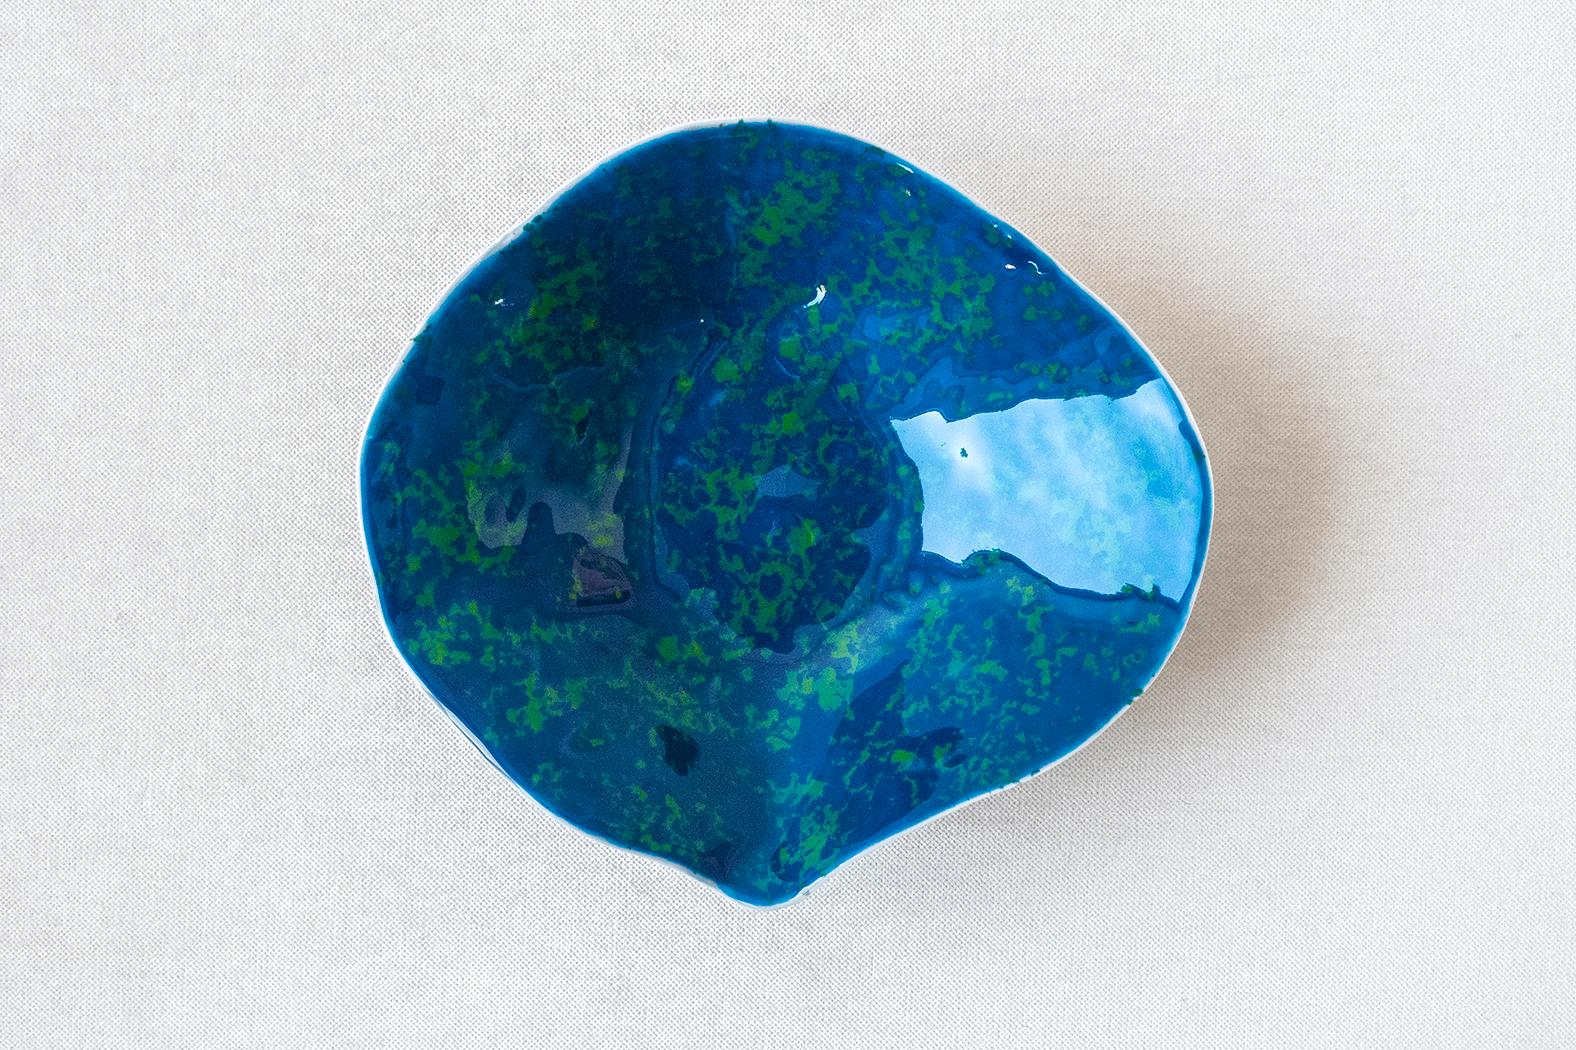 • Medium bowl
• Measures: 18cm x 17cm x 5cm 
• Perfect for a starter soup, dessert or side dish
• Hand painted deep blue glaze with green variations
• Richly textured unglazed bottom
• Designed in Amsterdam / handmade in France
• True